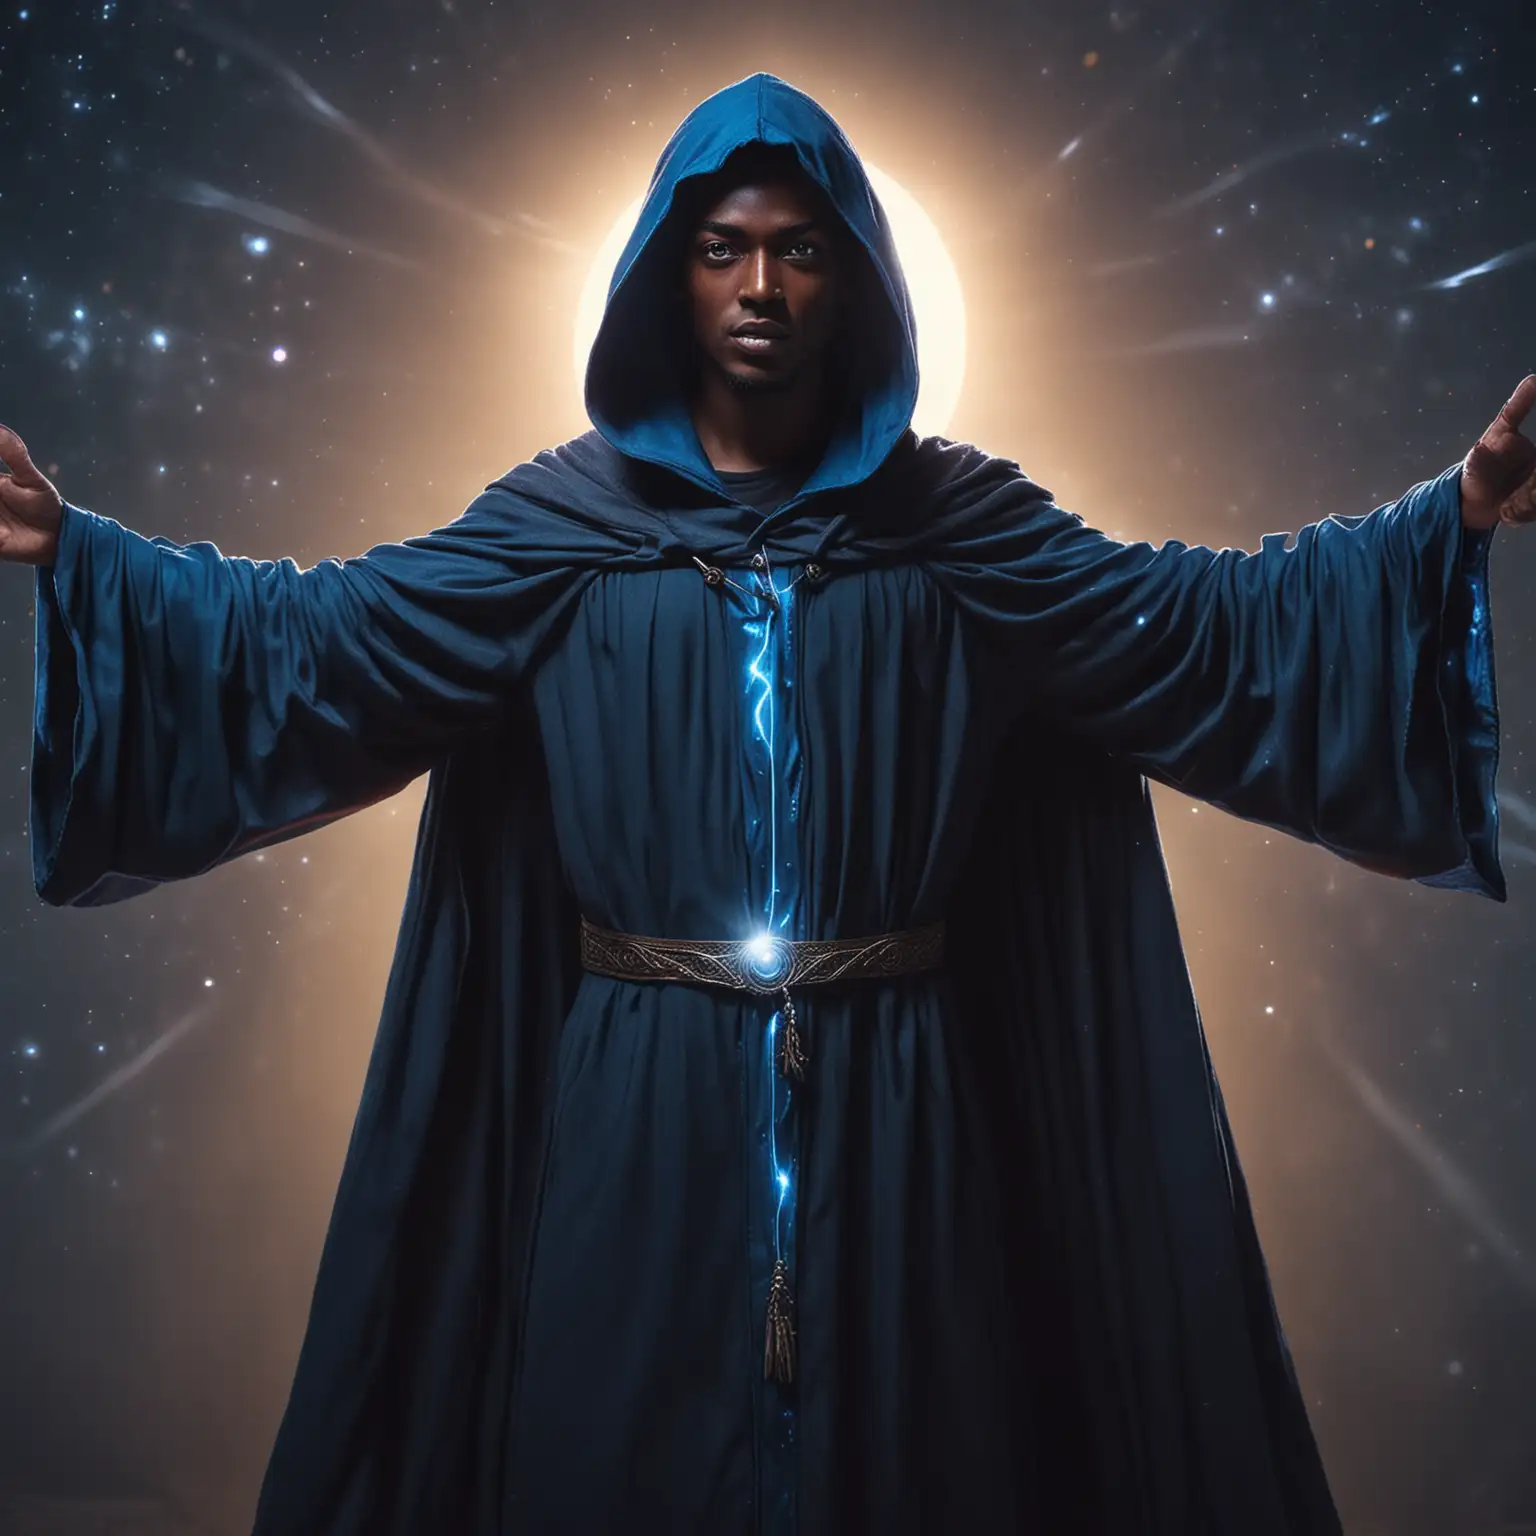 Tall dark skinned galatic being with light blue eyes, dressed in a dark blue hooded wizard robe, standing with arms outreached with celestial bright lights and sun behind it.